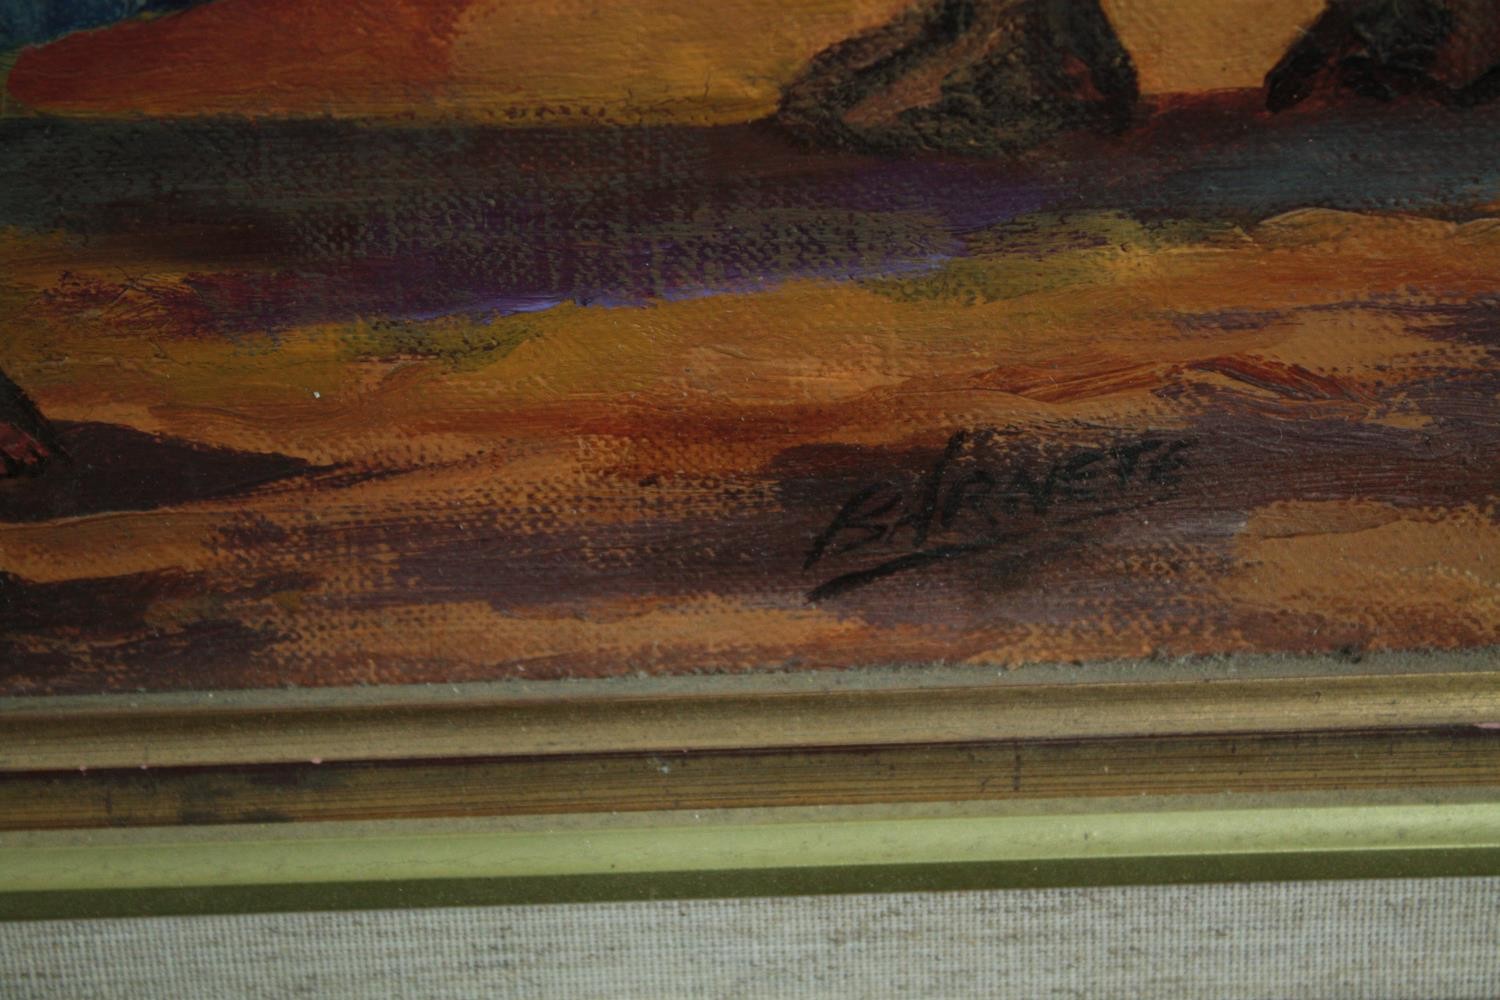 Oil painting on board. Arabs and camel. Signed 'Barnete' lower right. Framed. H.78 W.60 cm. - Image 3 of 4